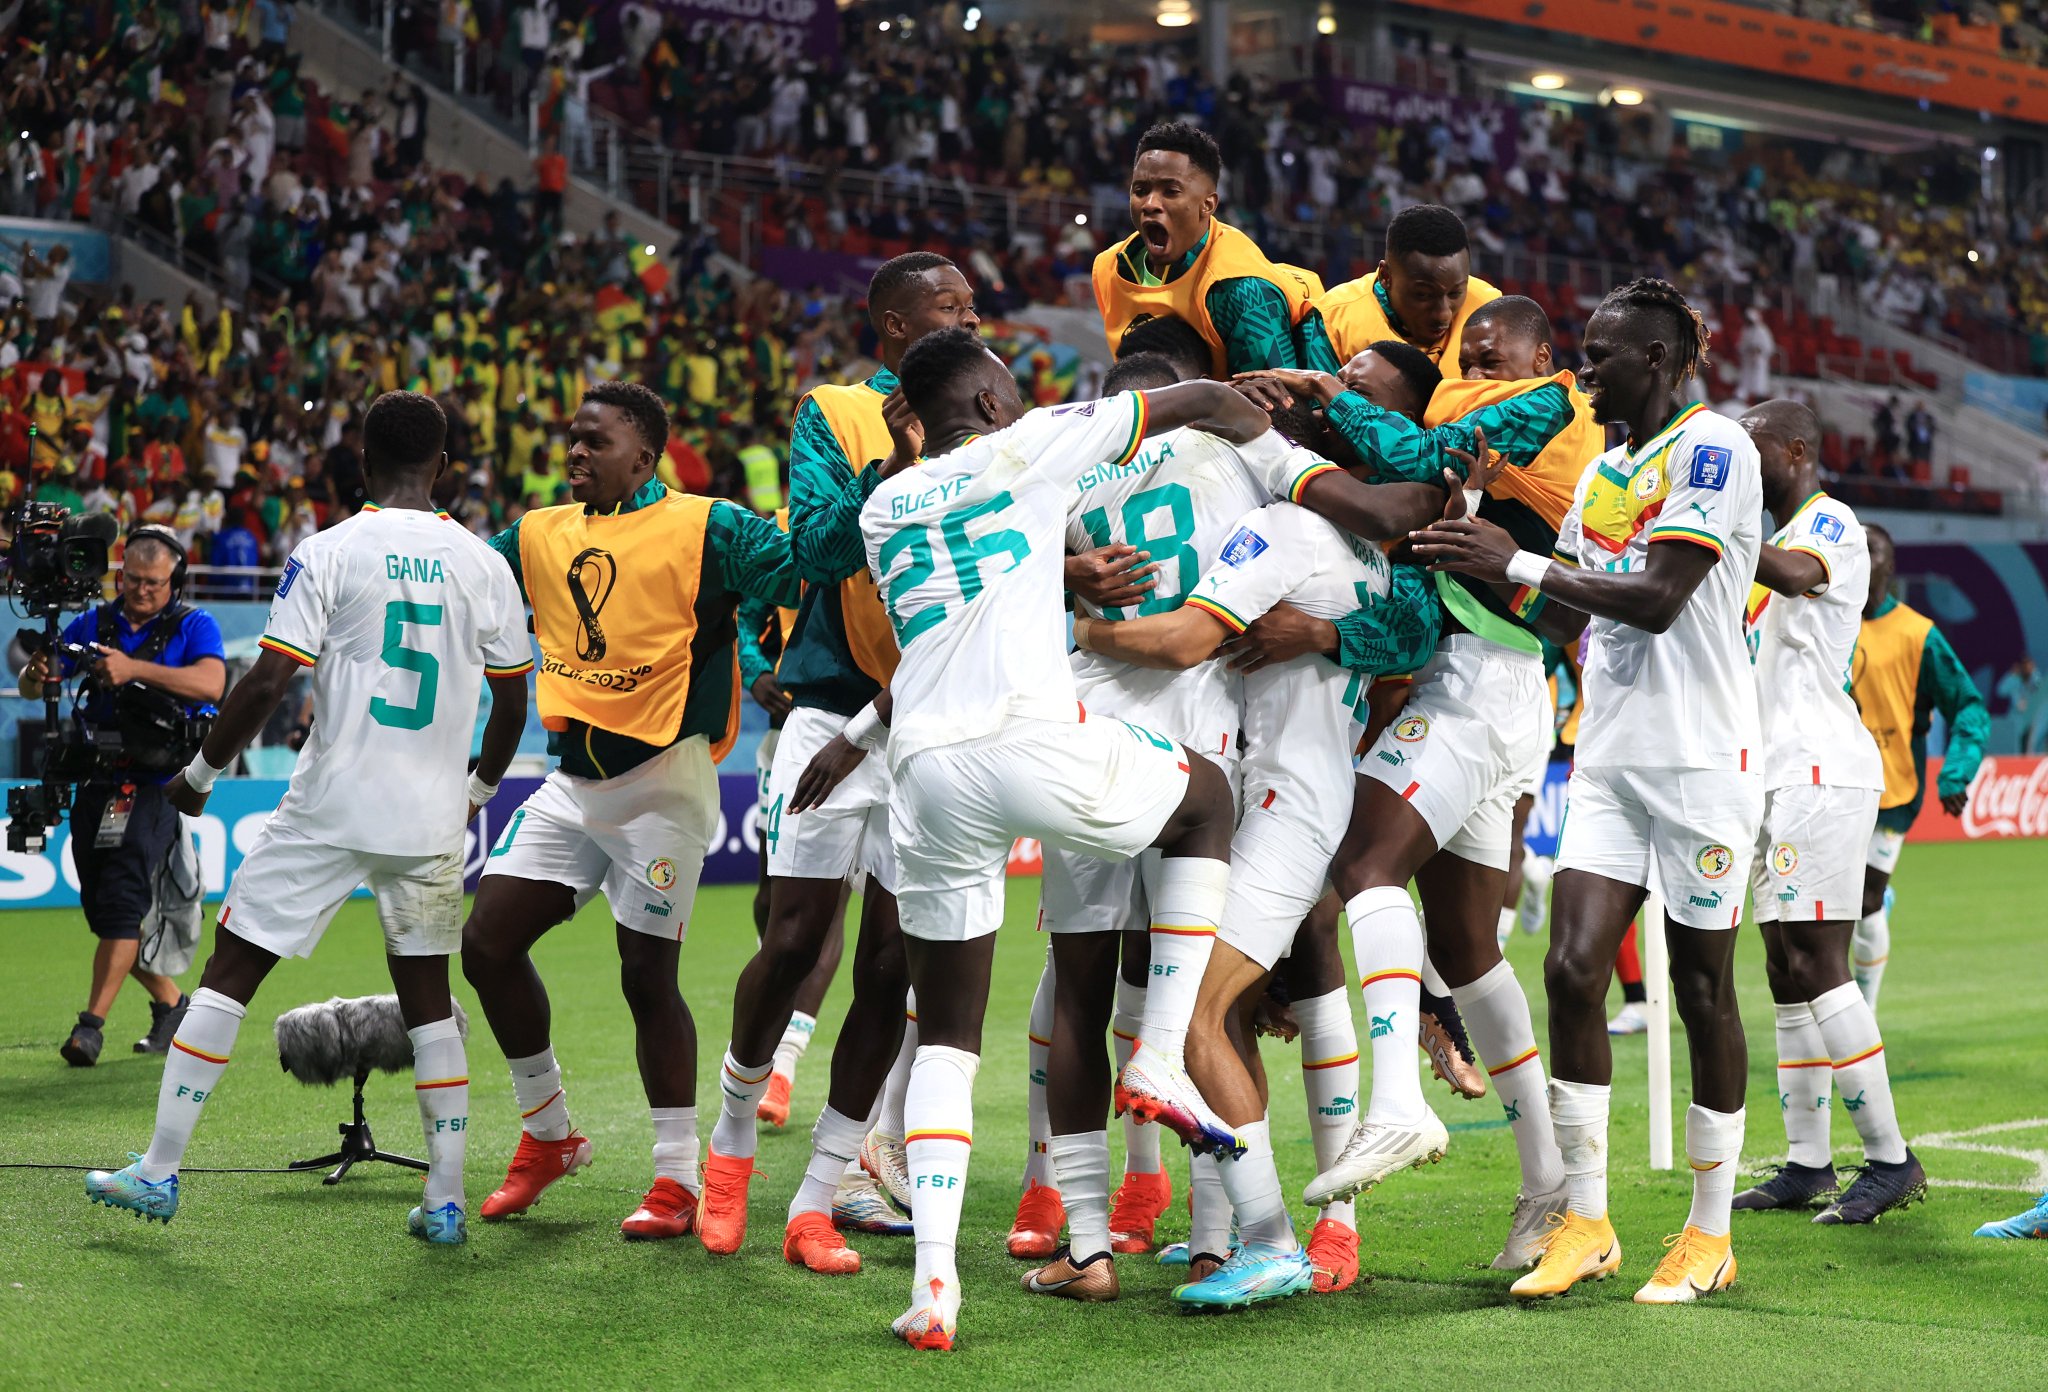 Senegal Beat Ecuador To Qualify For Round Of 16 As Netherlands Overcome Qatar To Finish Top